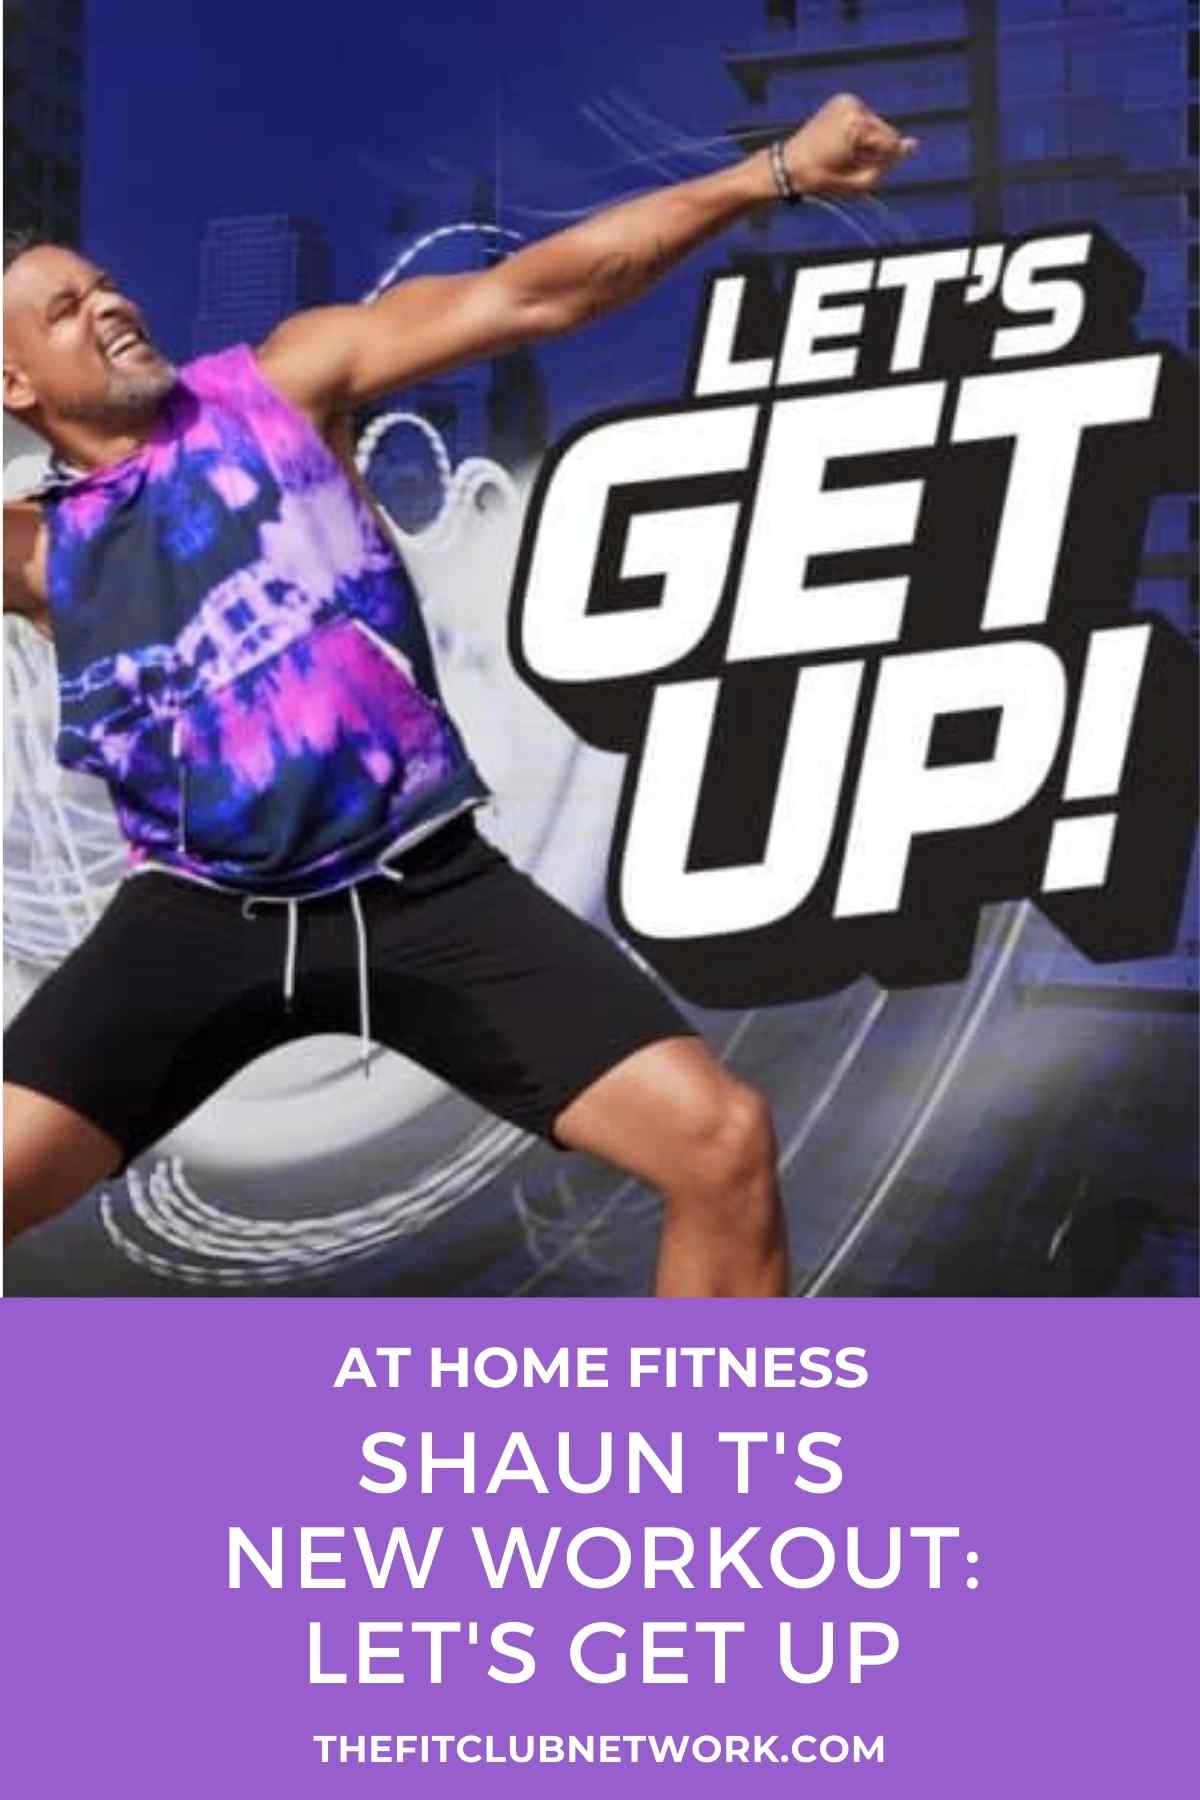 Shaun T’s New Workout — “Let’s Get Up!”